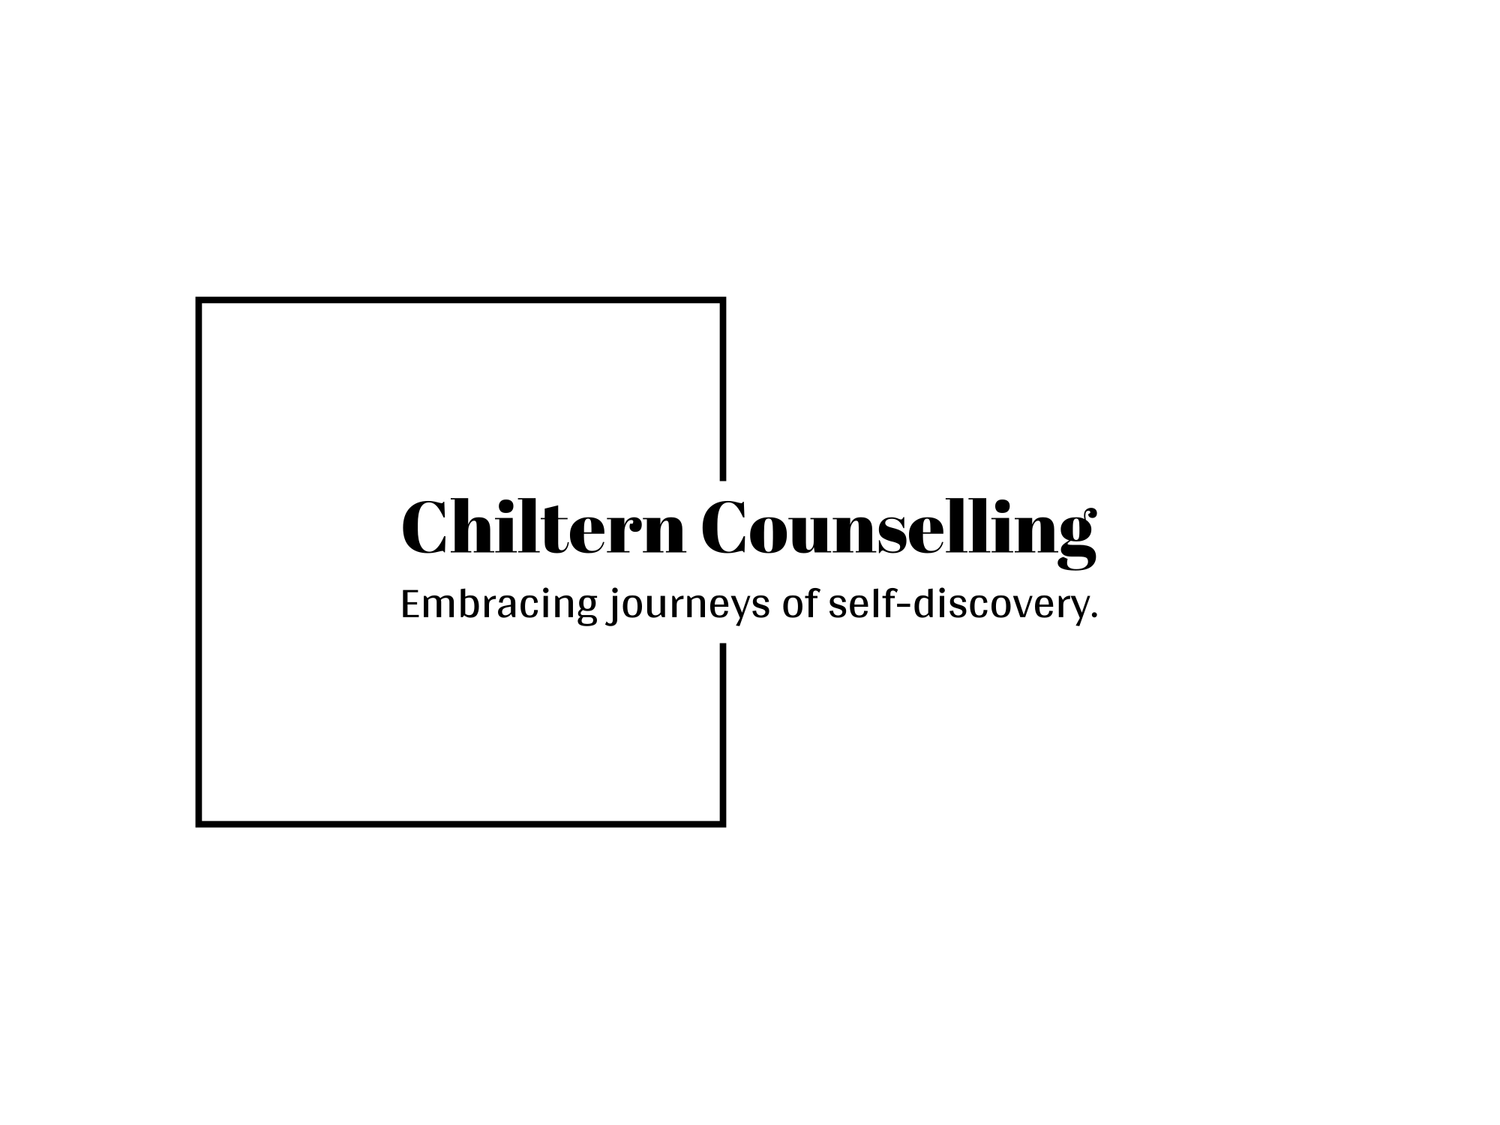 Chiltern Counselling